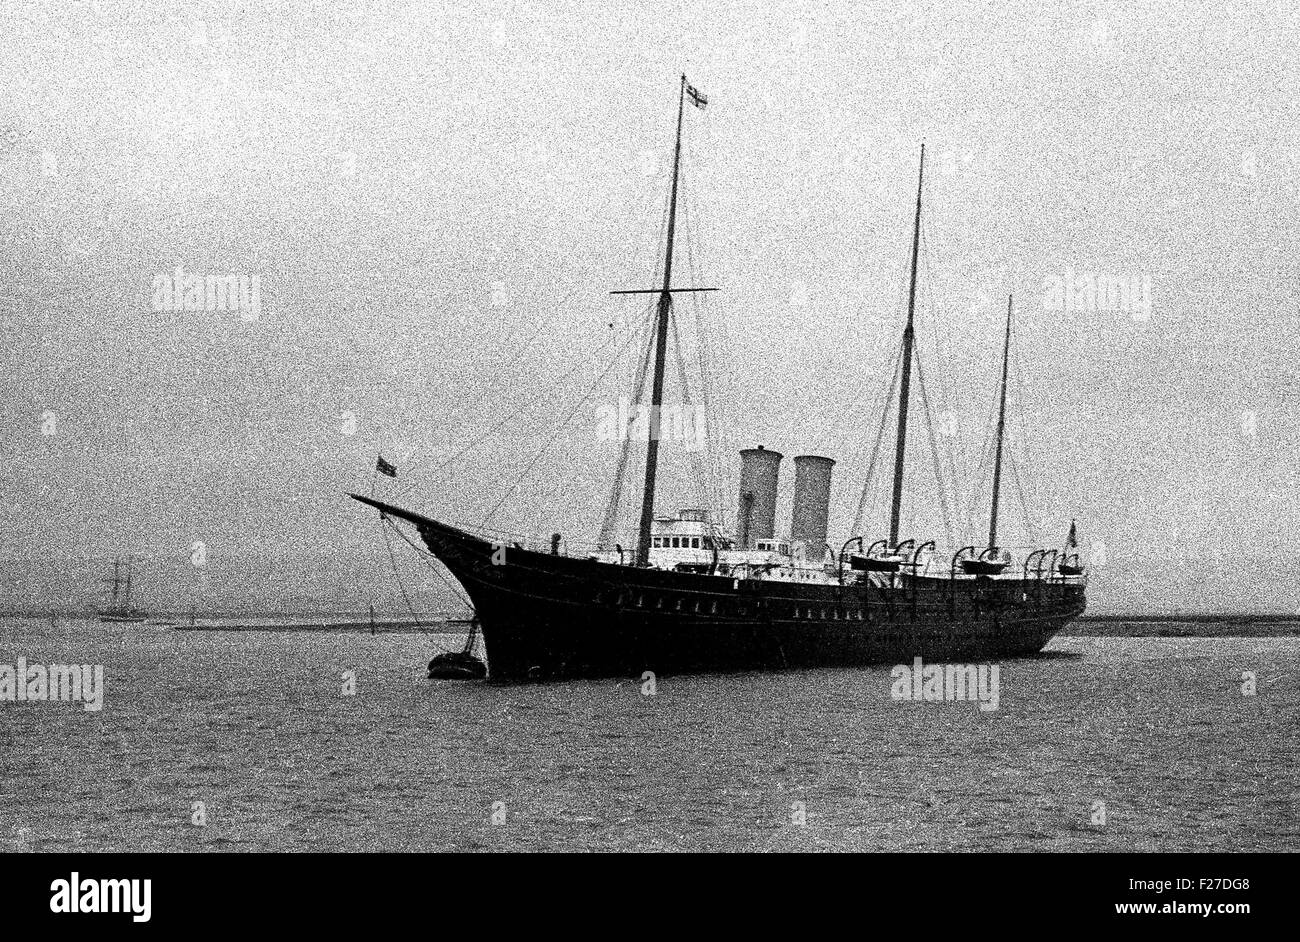 AJAXNETPHOTO.- 1930S. PORTSMOUTH, ENGLAND.  - ROYAL YACHT - HMY VICTORIA & ALBERT III AT HER MOORINGS NEAR WHALE ISLAND IN PORTSMOUTH HARBOUR. PHOTO:AJAX VINTAGE PICTURE LIBRARY. REF:EPS012 1 Stock Photo